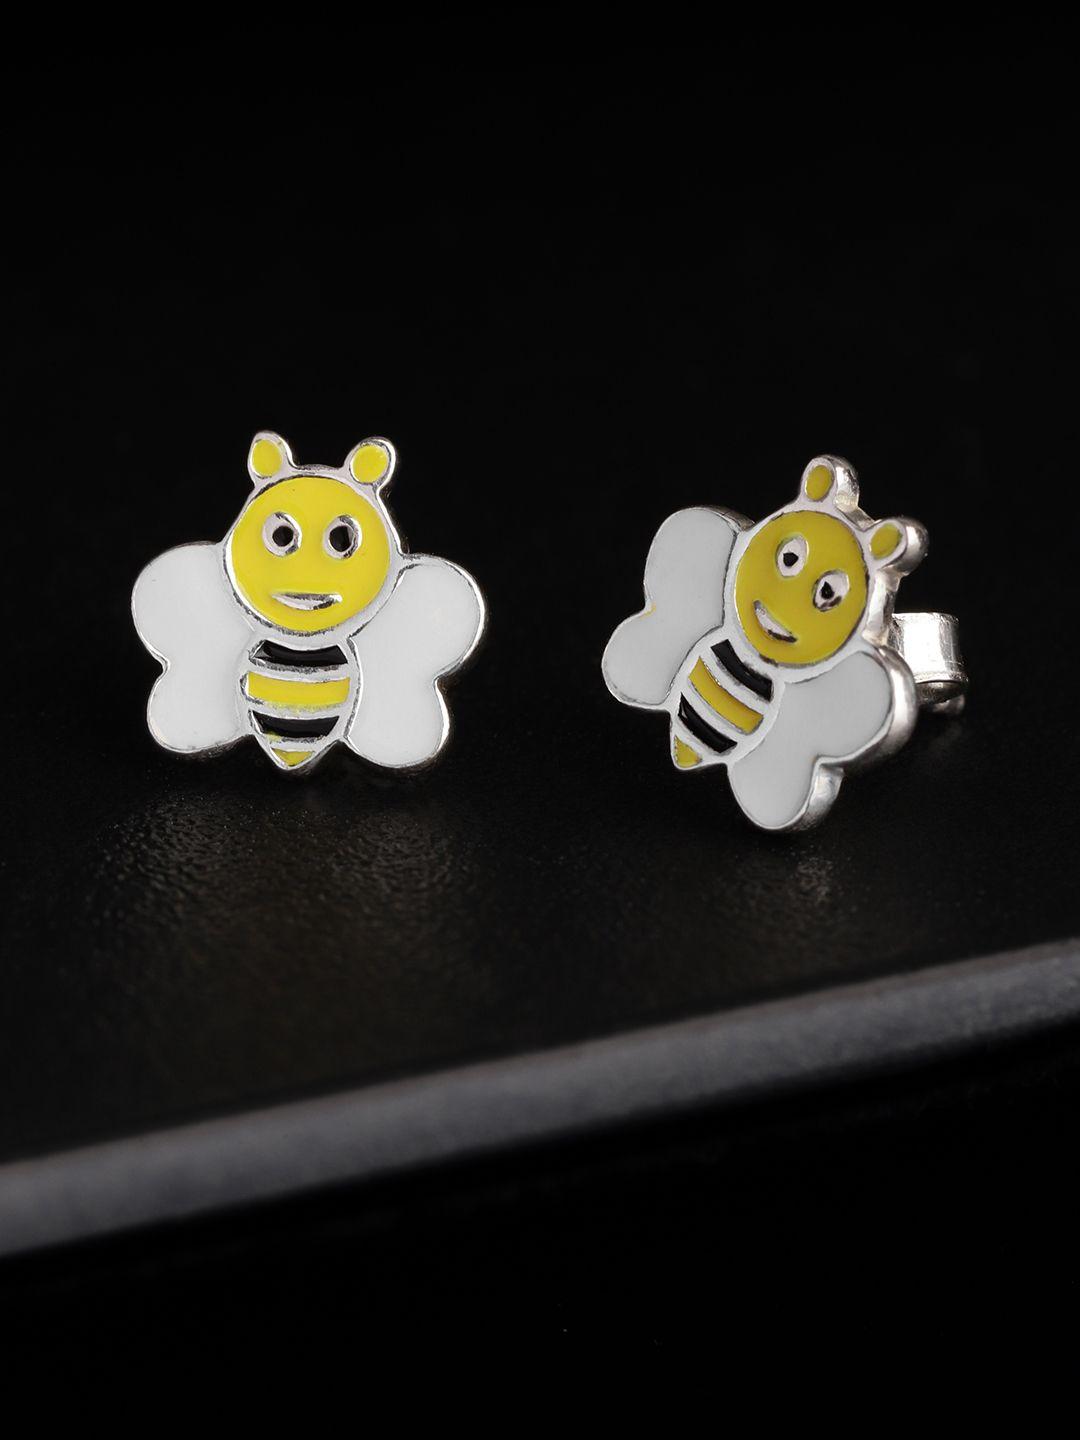 carlton-london-925sterling-silver-yellow-&-off-white-rhodium-plated-enamelled-quirky-studs